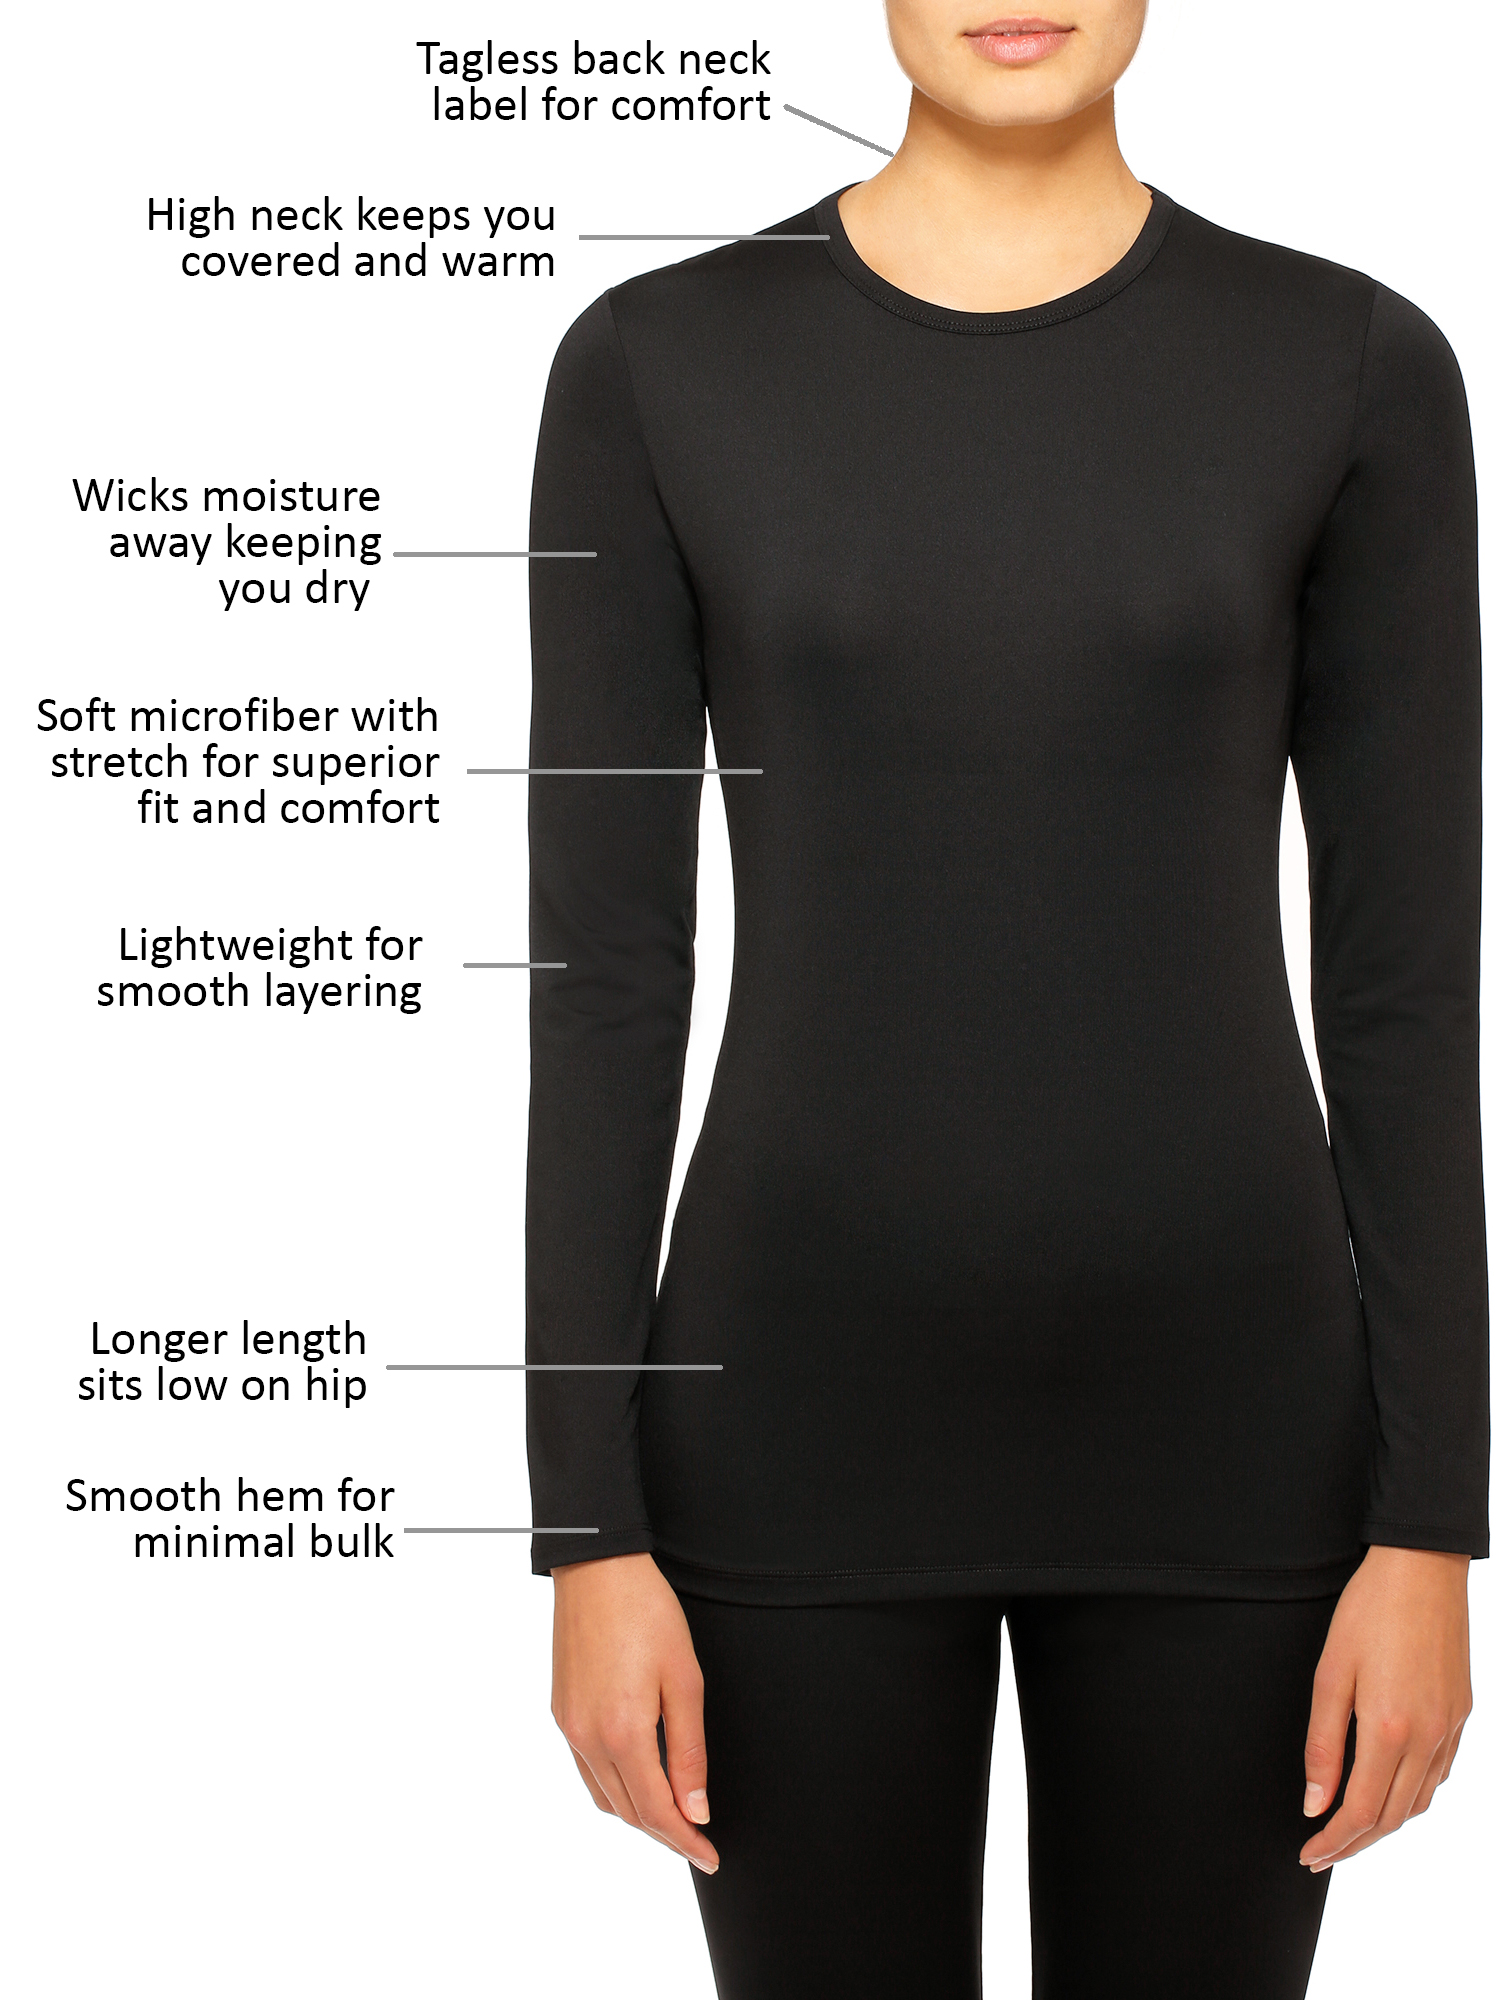 ClimateRight by Cuddl Duds Women's and Women's Plus Stretch Microfiber Warm Long Underwear Top - image 3 of 3